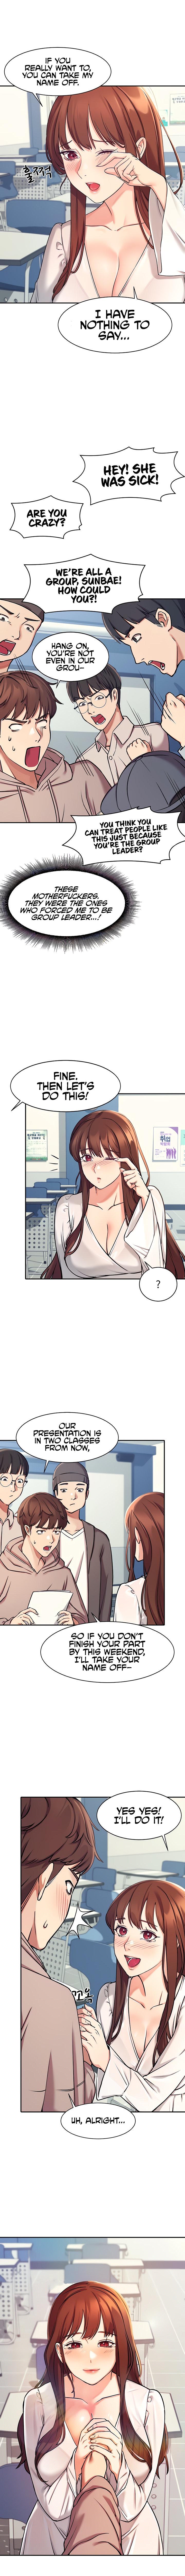 Is There No Goddess in My College? Ch.18/? 11